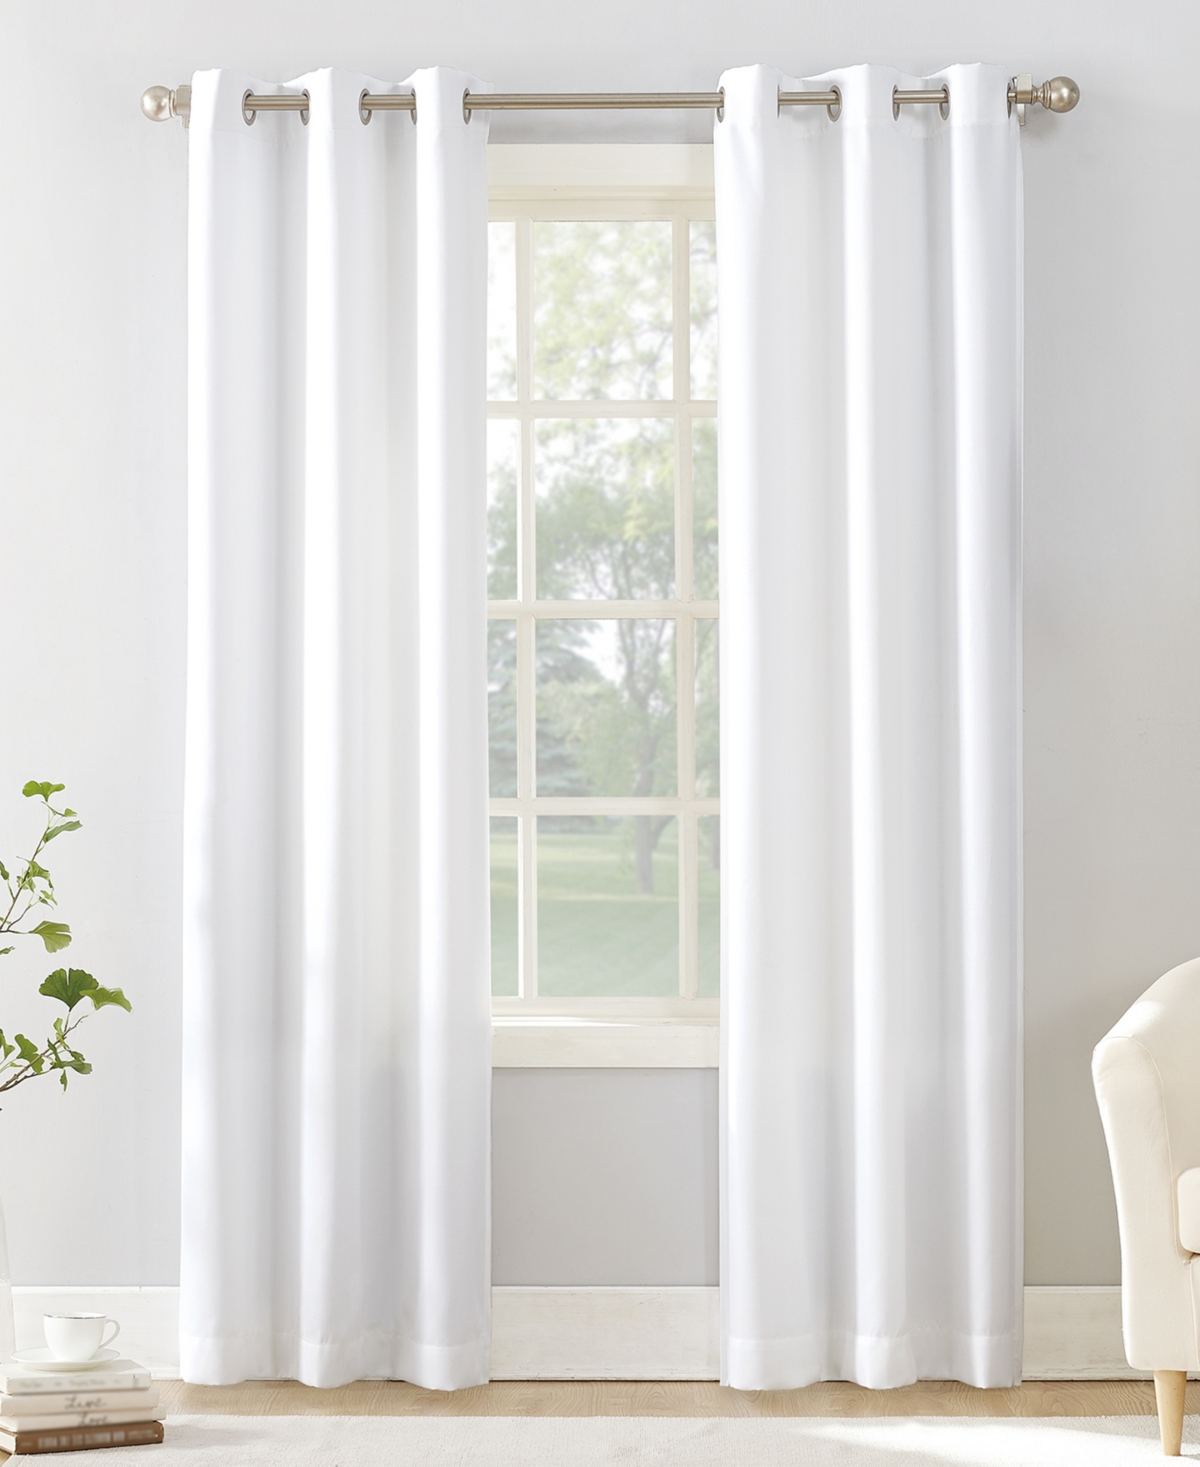 No. 918 Valerie Casual Textured Semi-sheer Grommet Curtain Panel, 40" X 63" In White